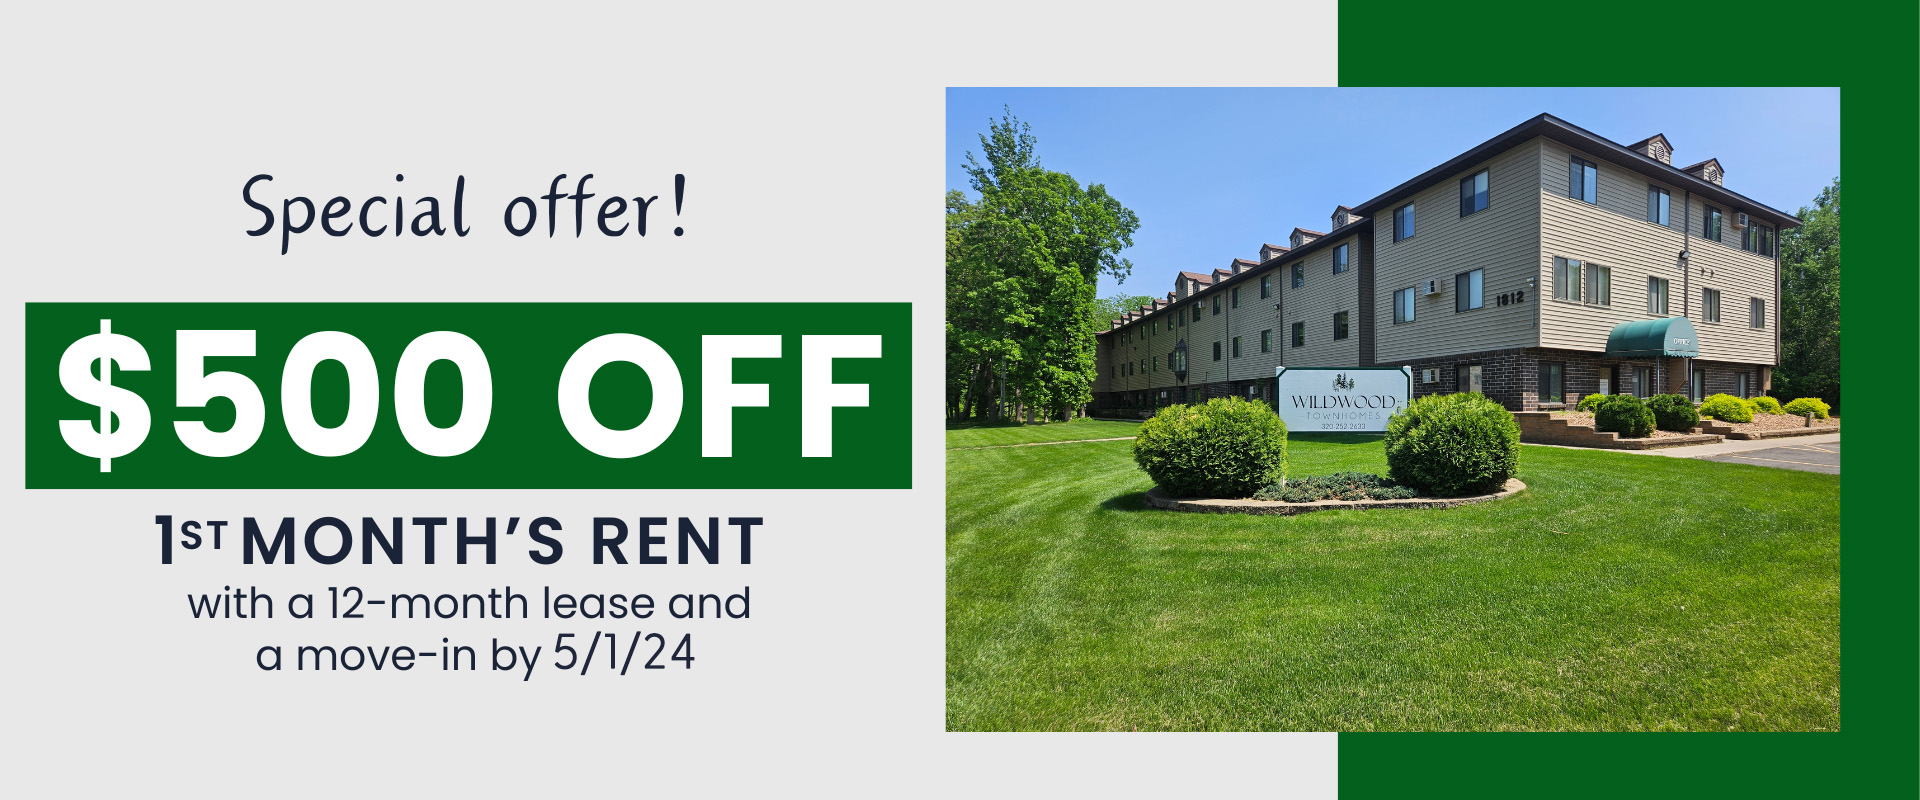 Wildwood Special. Special Offer! $500 Off 1st Month's Rent with a 12-month lease and a move-in by 5/1/24